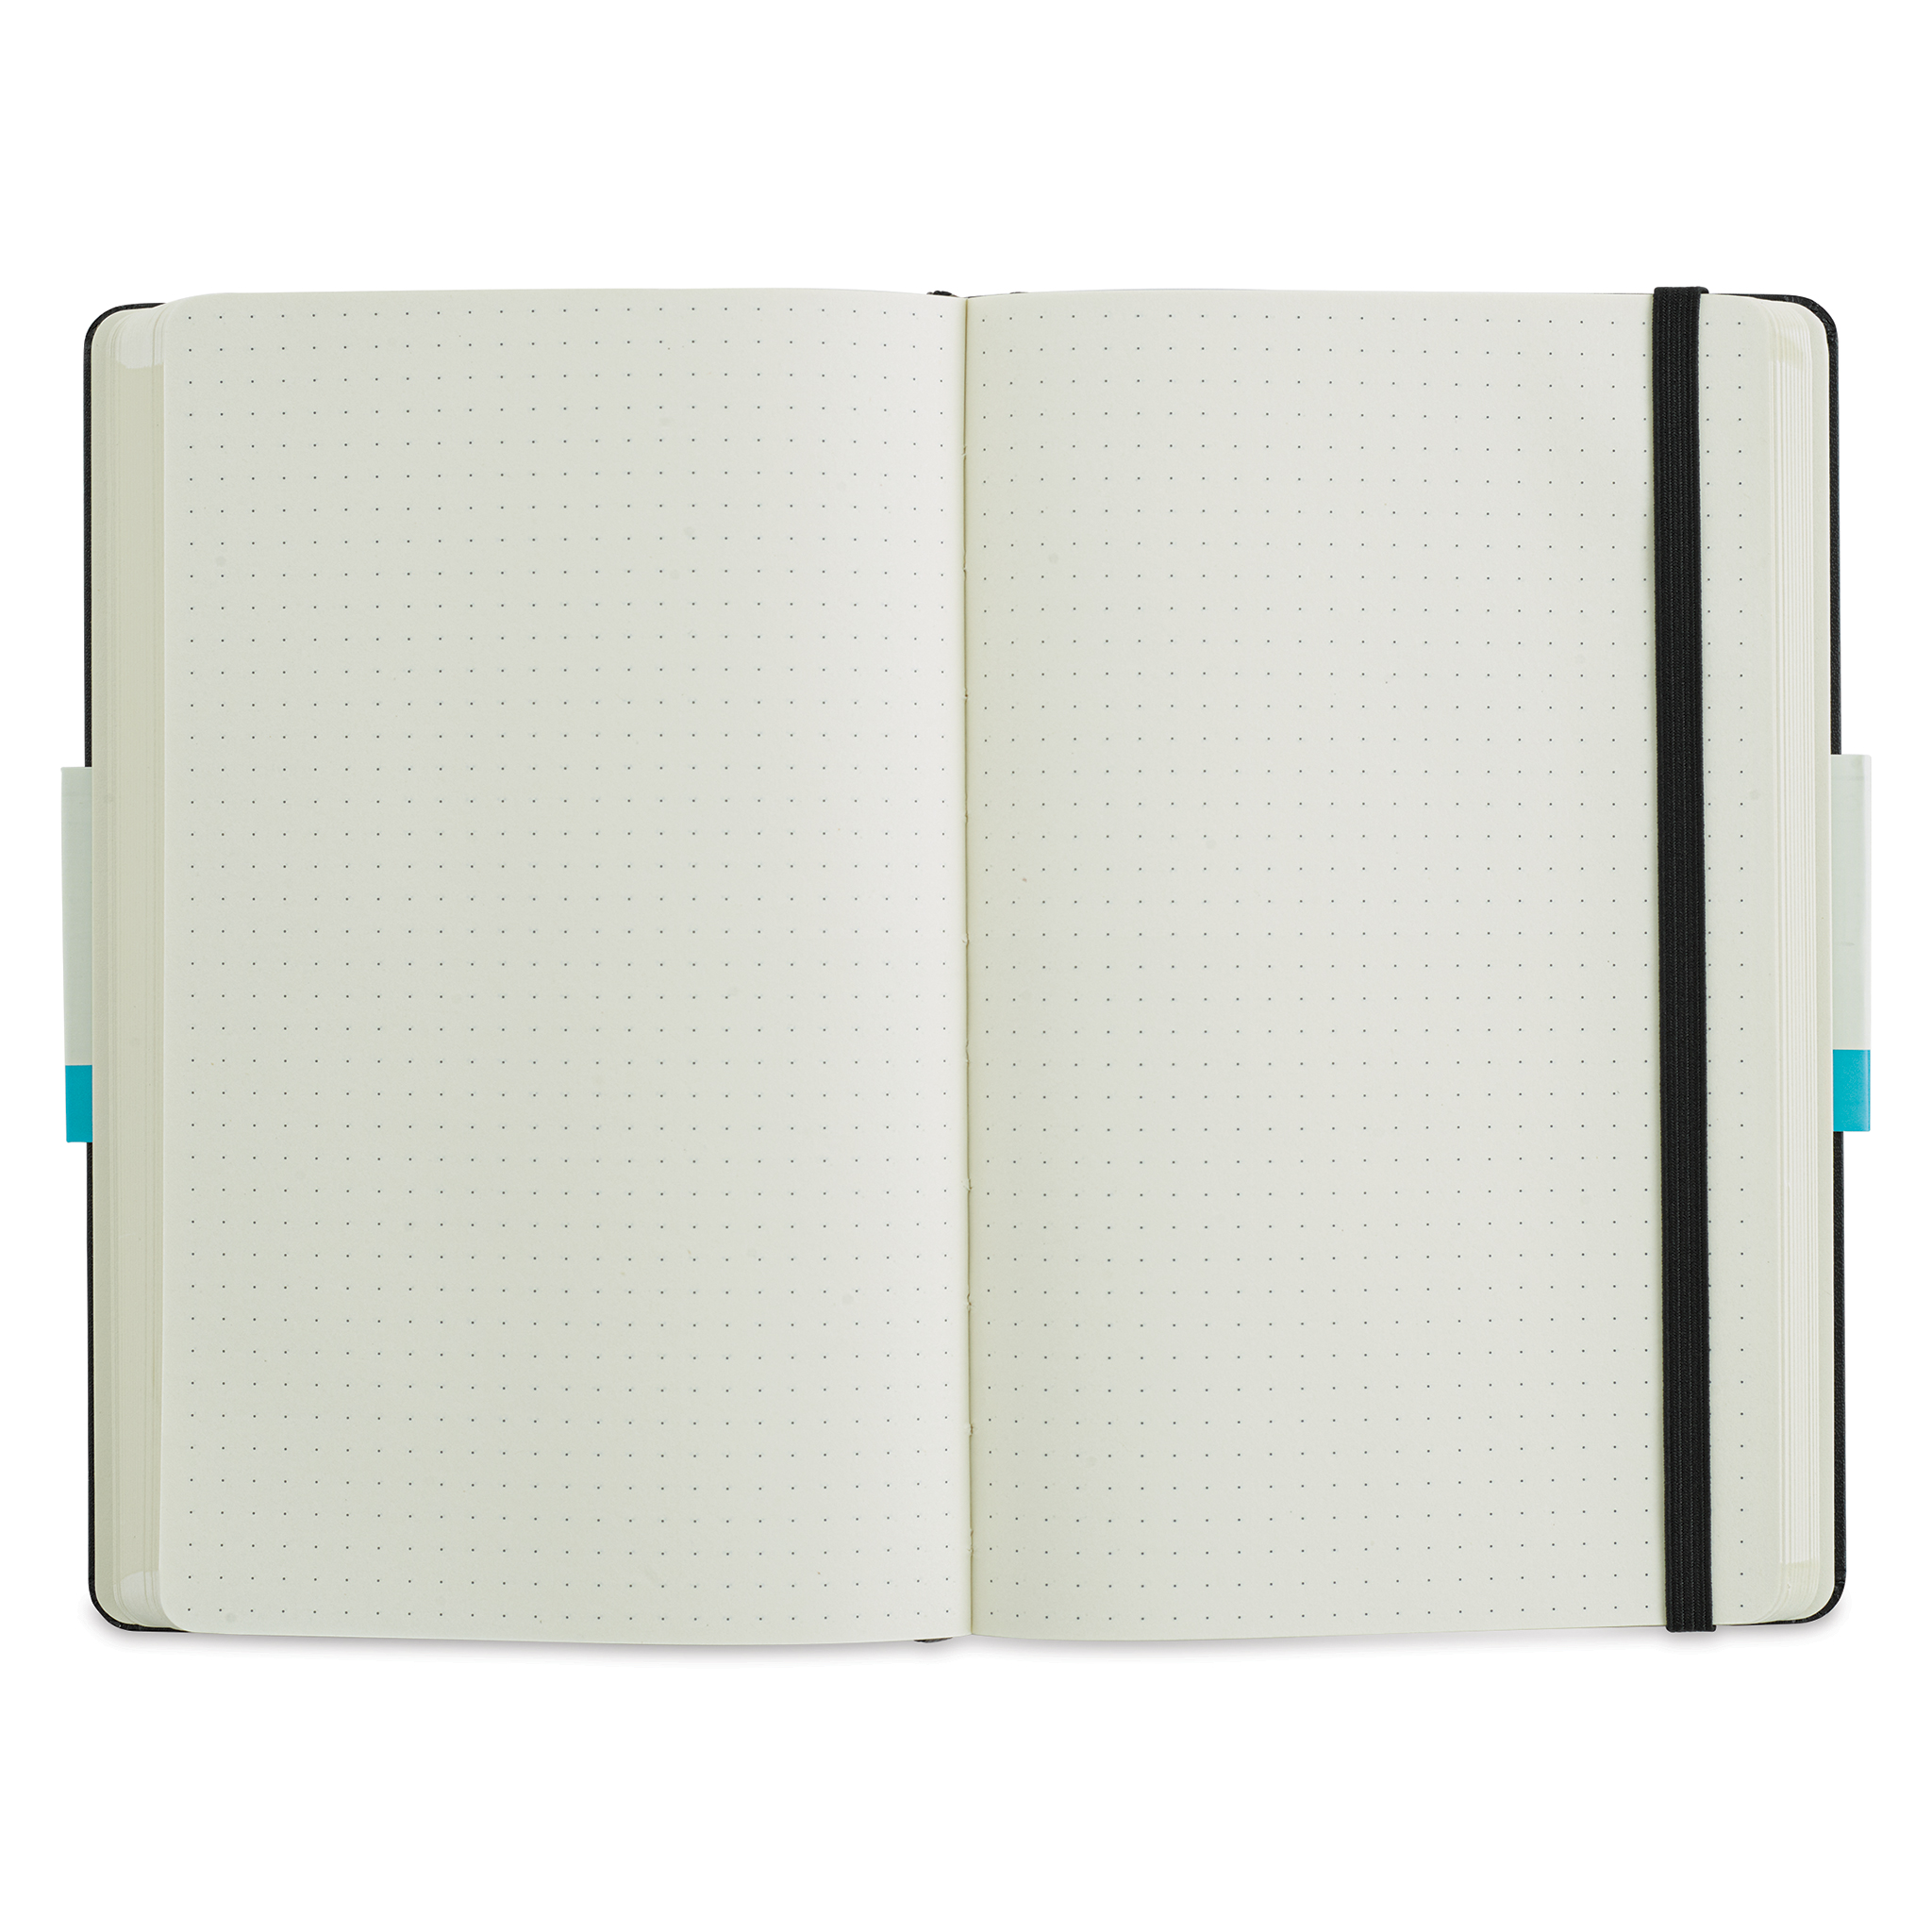 Moleskine Classic Collection Large A5 (21cm x 13cm) Soft Cover Notebook